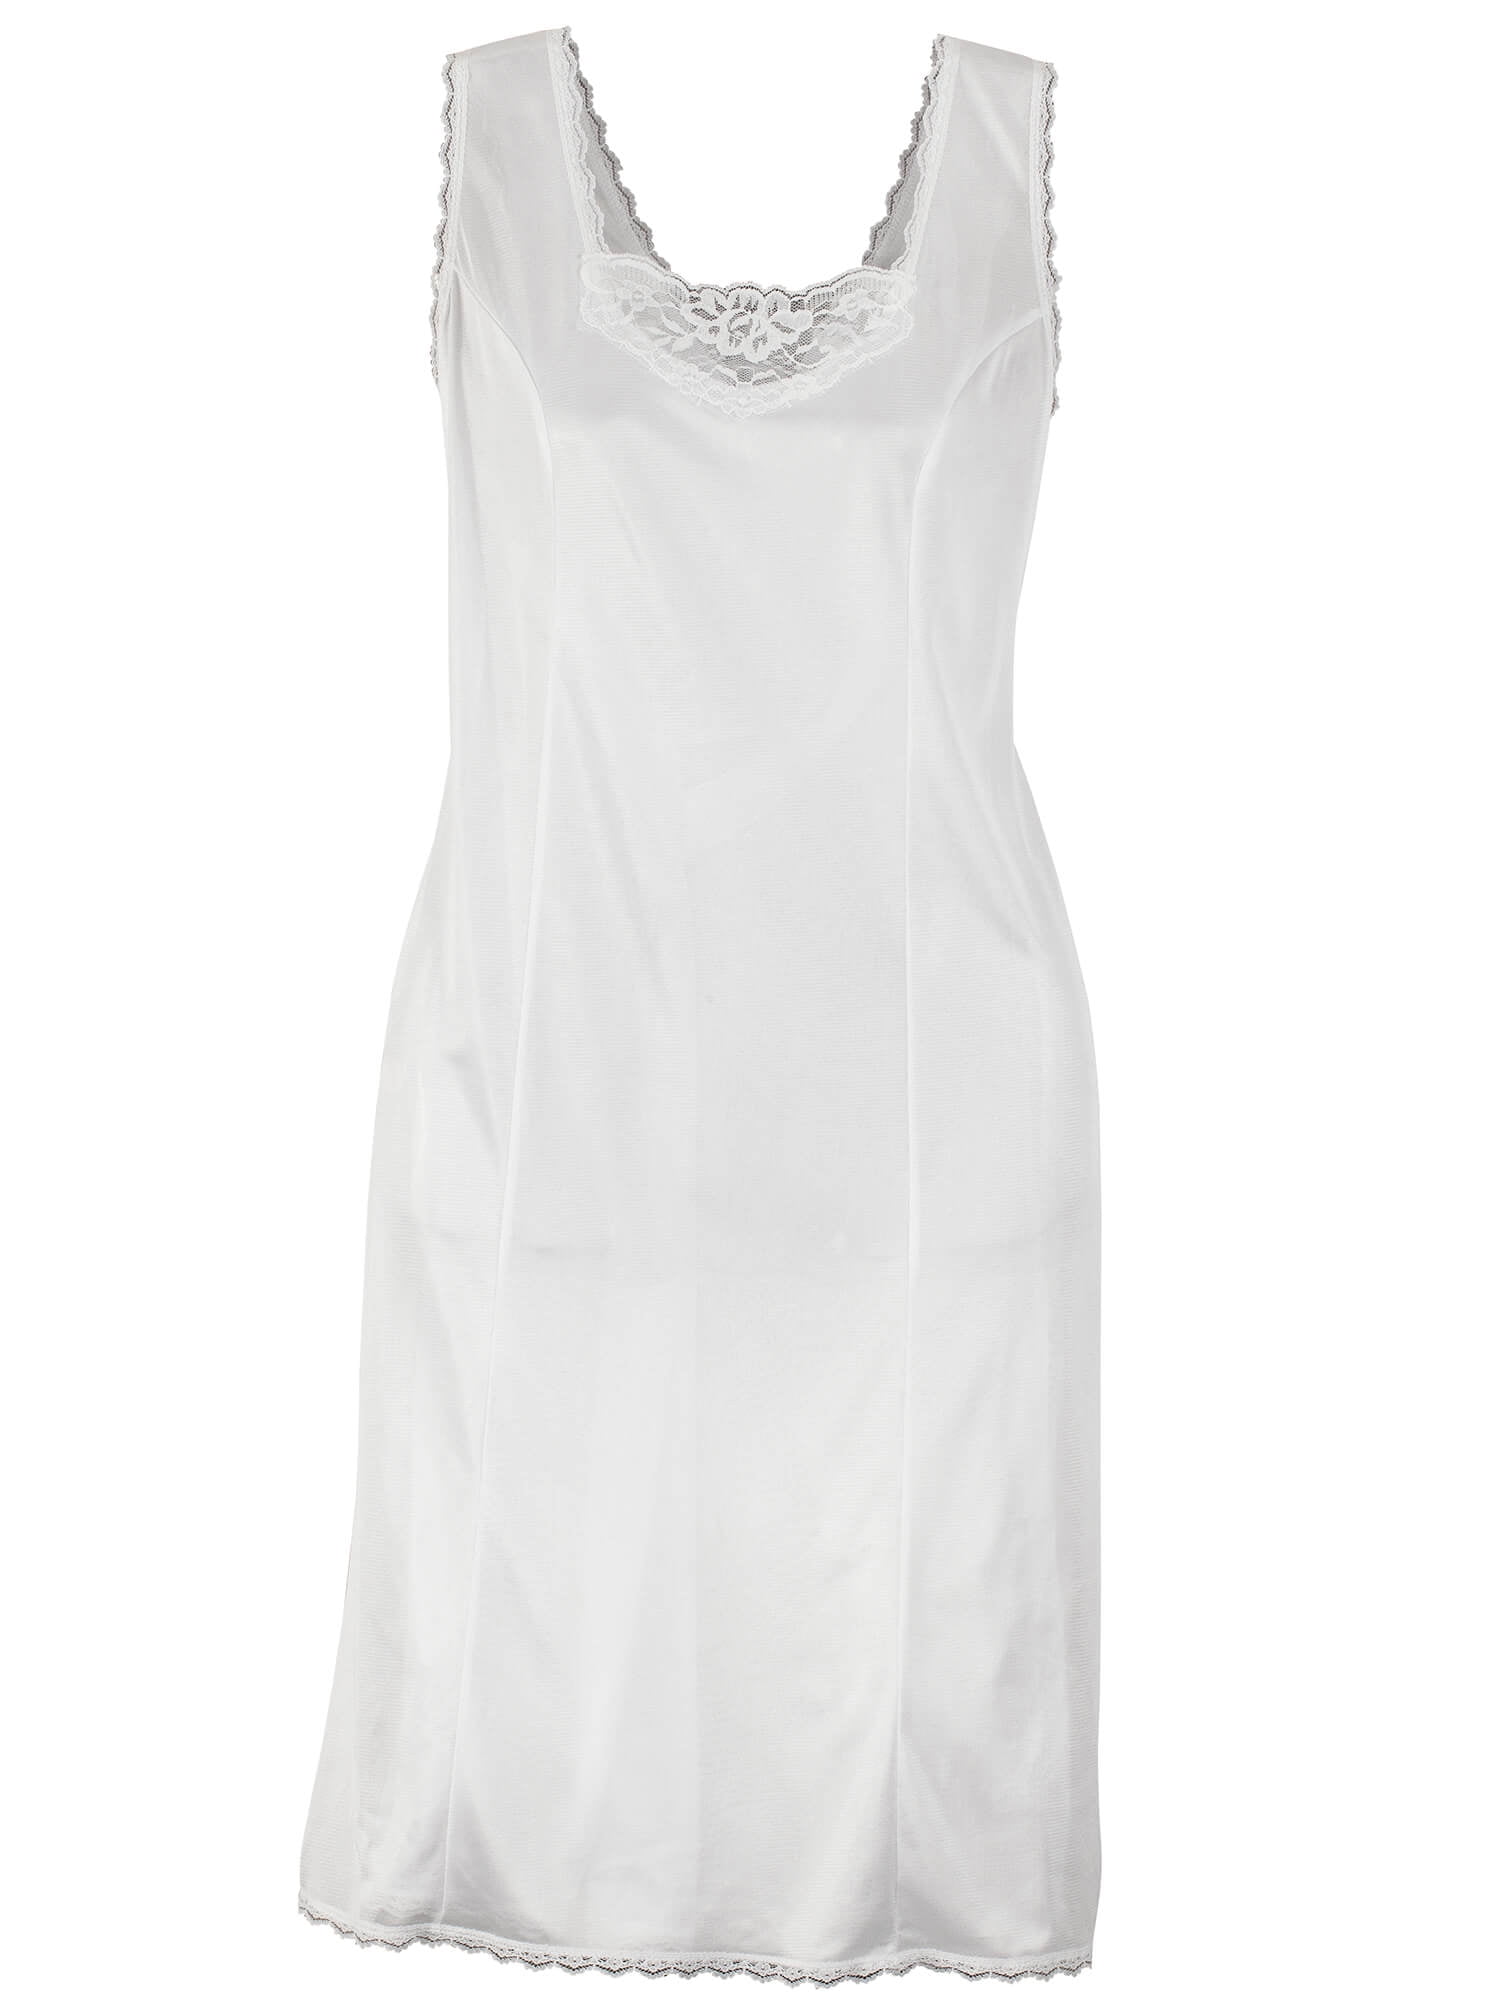 Easy Comforts StyleTM Lace Trimmed Full Slip - Walmart.com